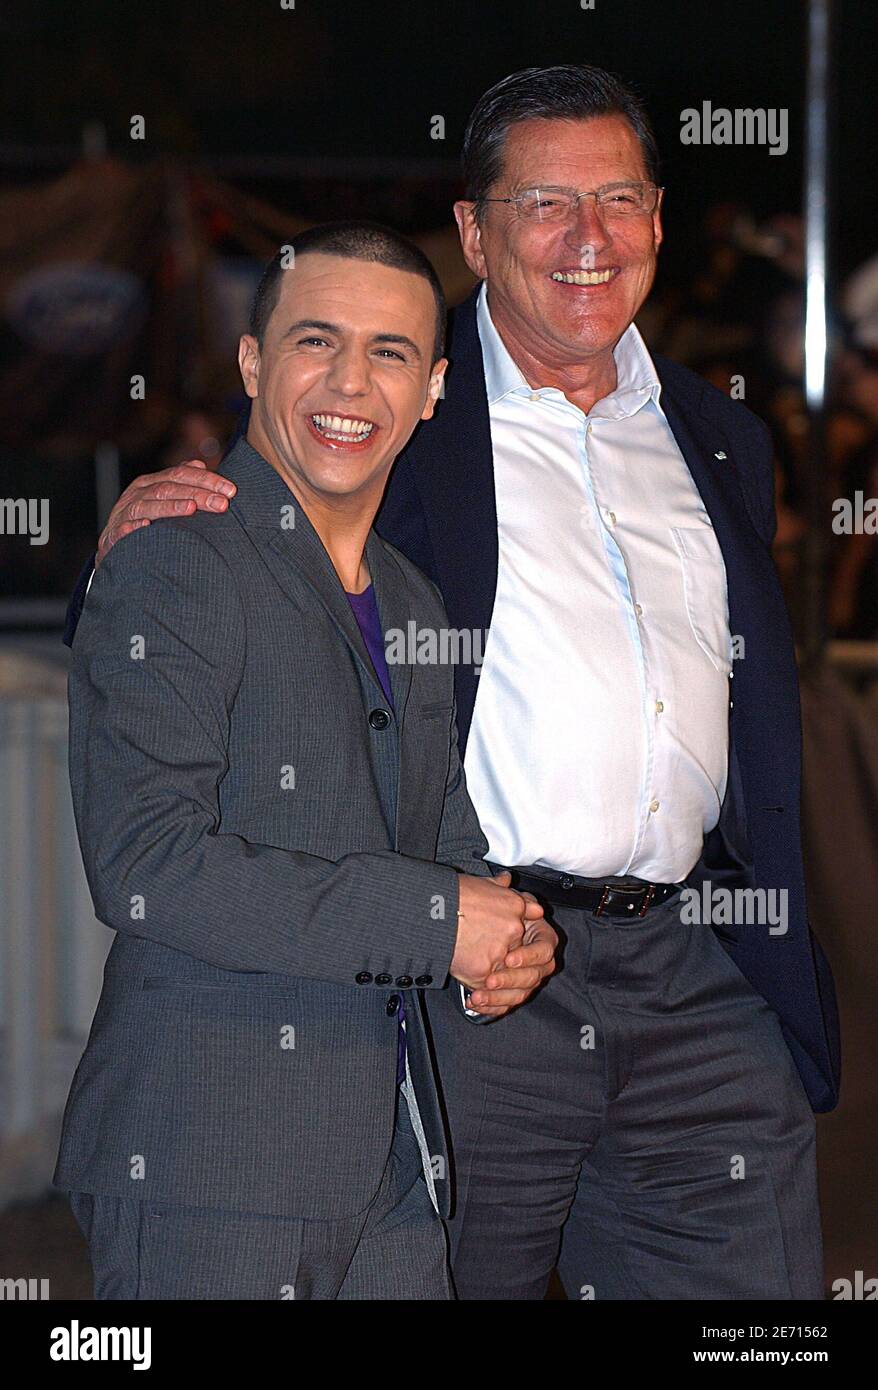 Faudel and Jean-Claude Camus attend the 2007 NRJ Music Awards held at the Palais des Festivals in Cannes, France on January 20, 2007. Photo by Khayat-Nebinger-Gorassini/ABACAPRESS.COM Stock Photo